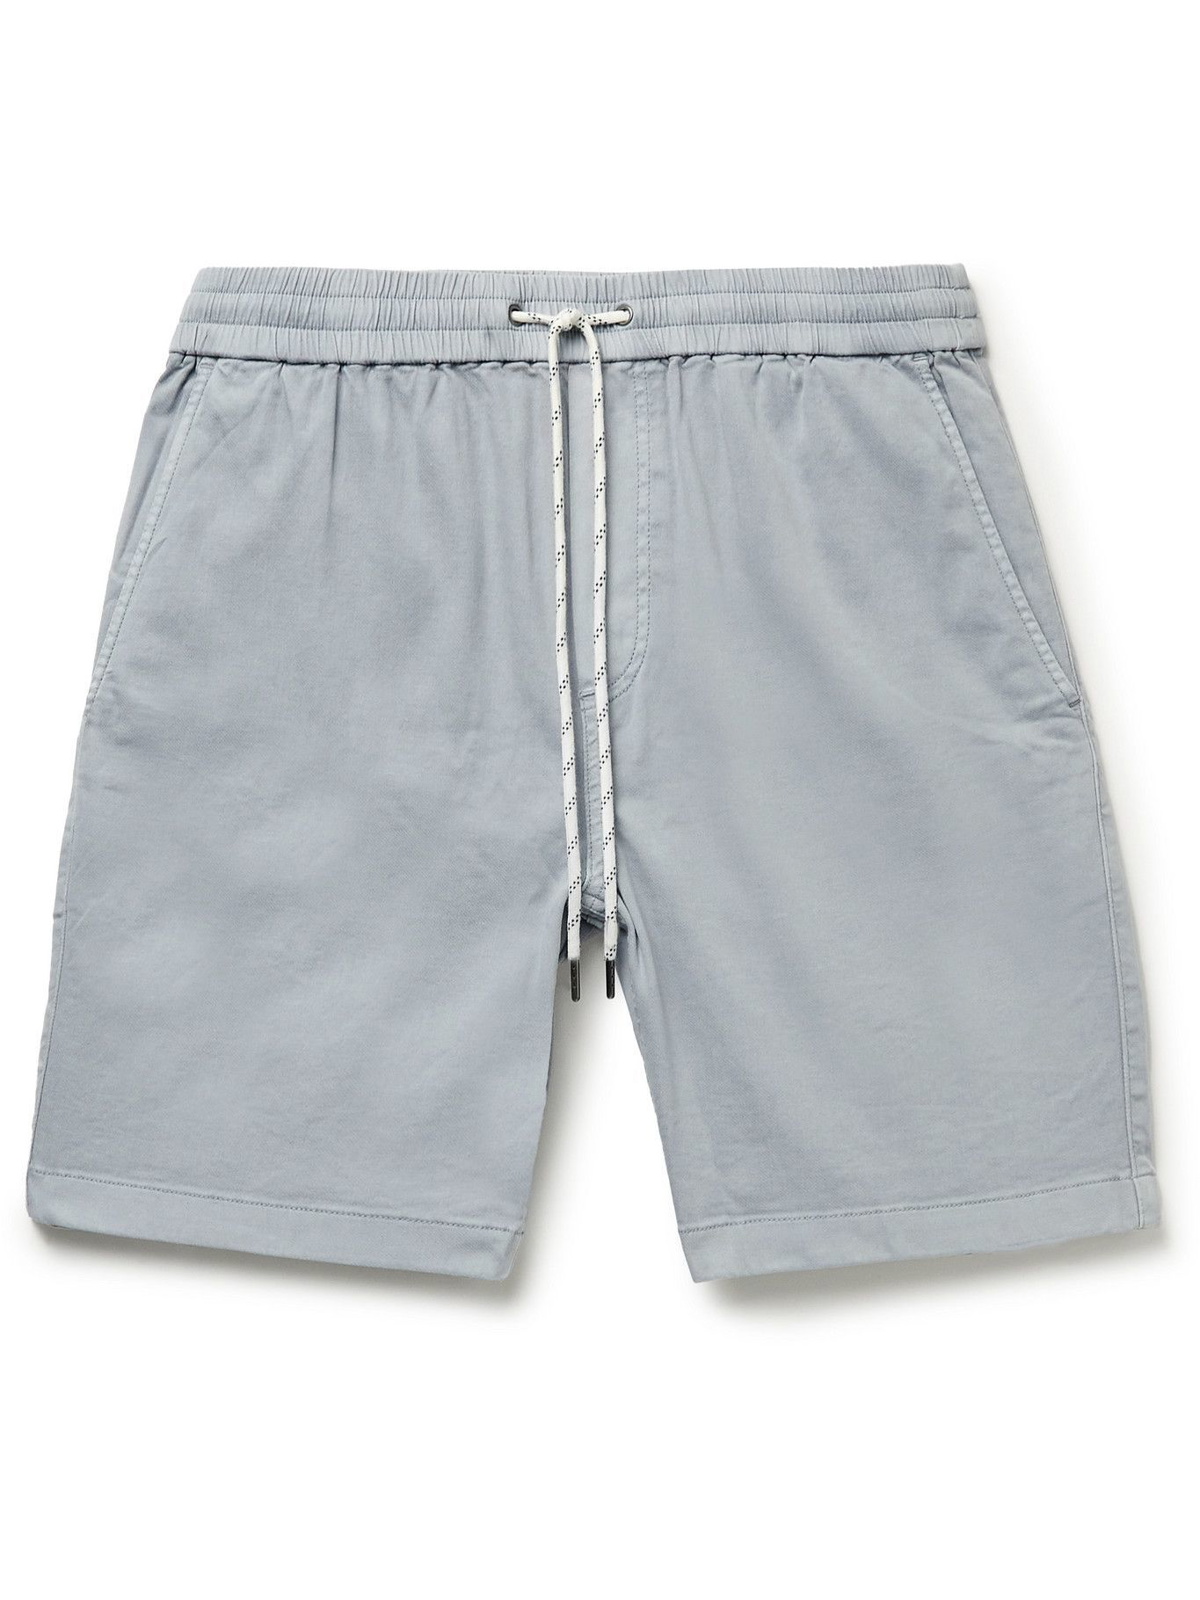 Faherty - Essential Slim-Fit Woven Drawstring Shorts - Gray Faherty